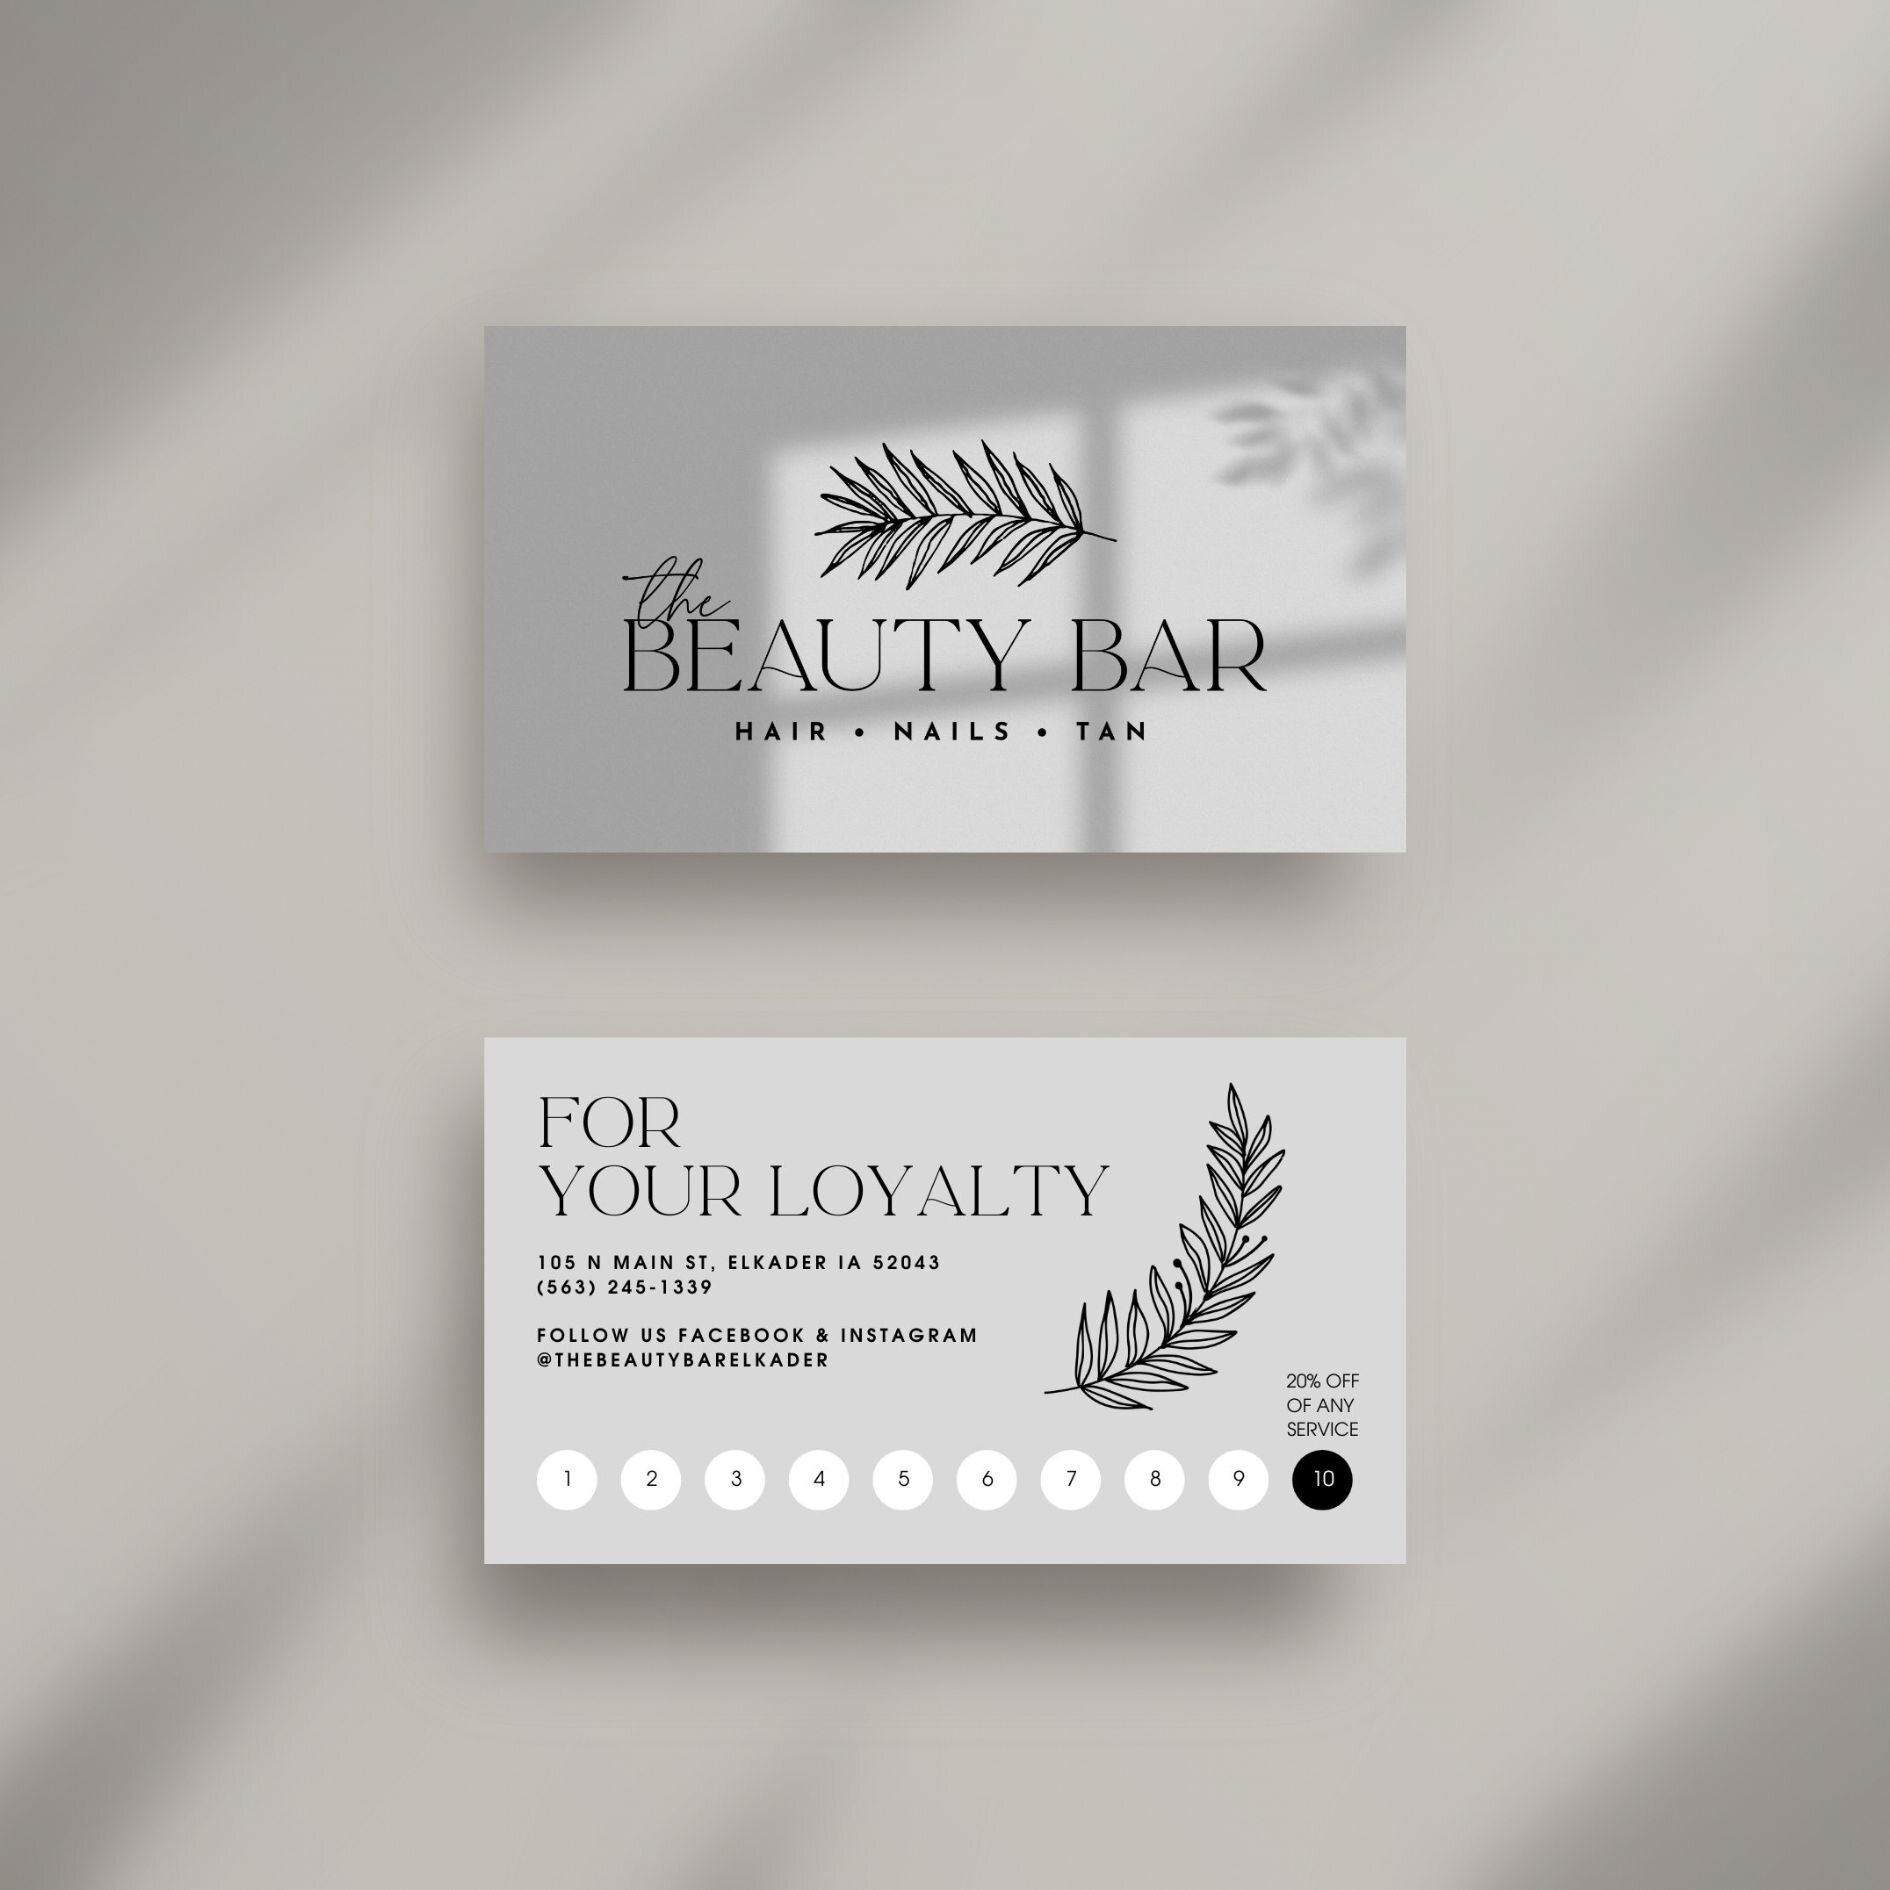 Say hello to the new masculine loyalty cards, joining our classic feminine ones. 🚹 🚺
Now, everyone can enjoy a bit of pampering and rack up rewards at @thebeautybarelkader.

#StudioK8Ki #TheBeautyBarElkader